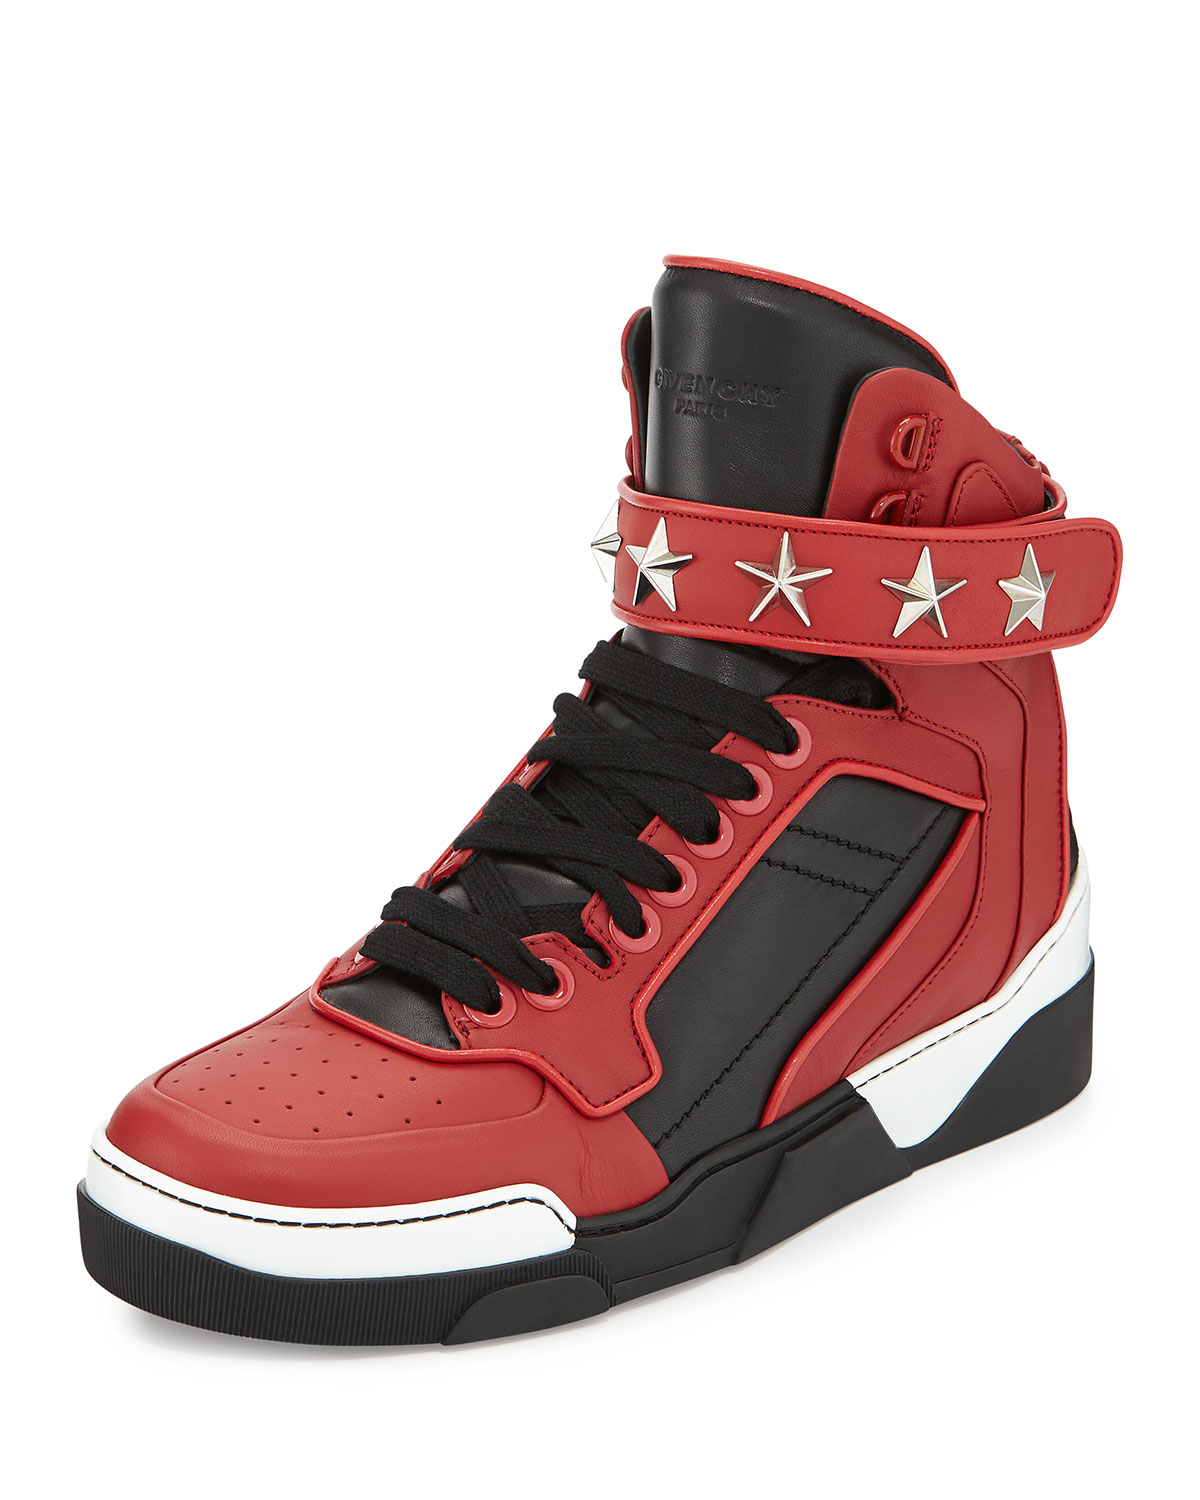 Skyhigh swg. Givenchy Tyson Sneakers. High Top Sneakers. High Top Sneakers men. Black and Red Sneaker.